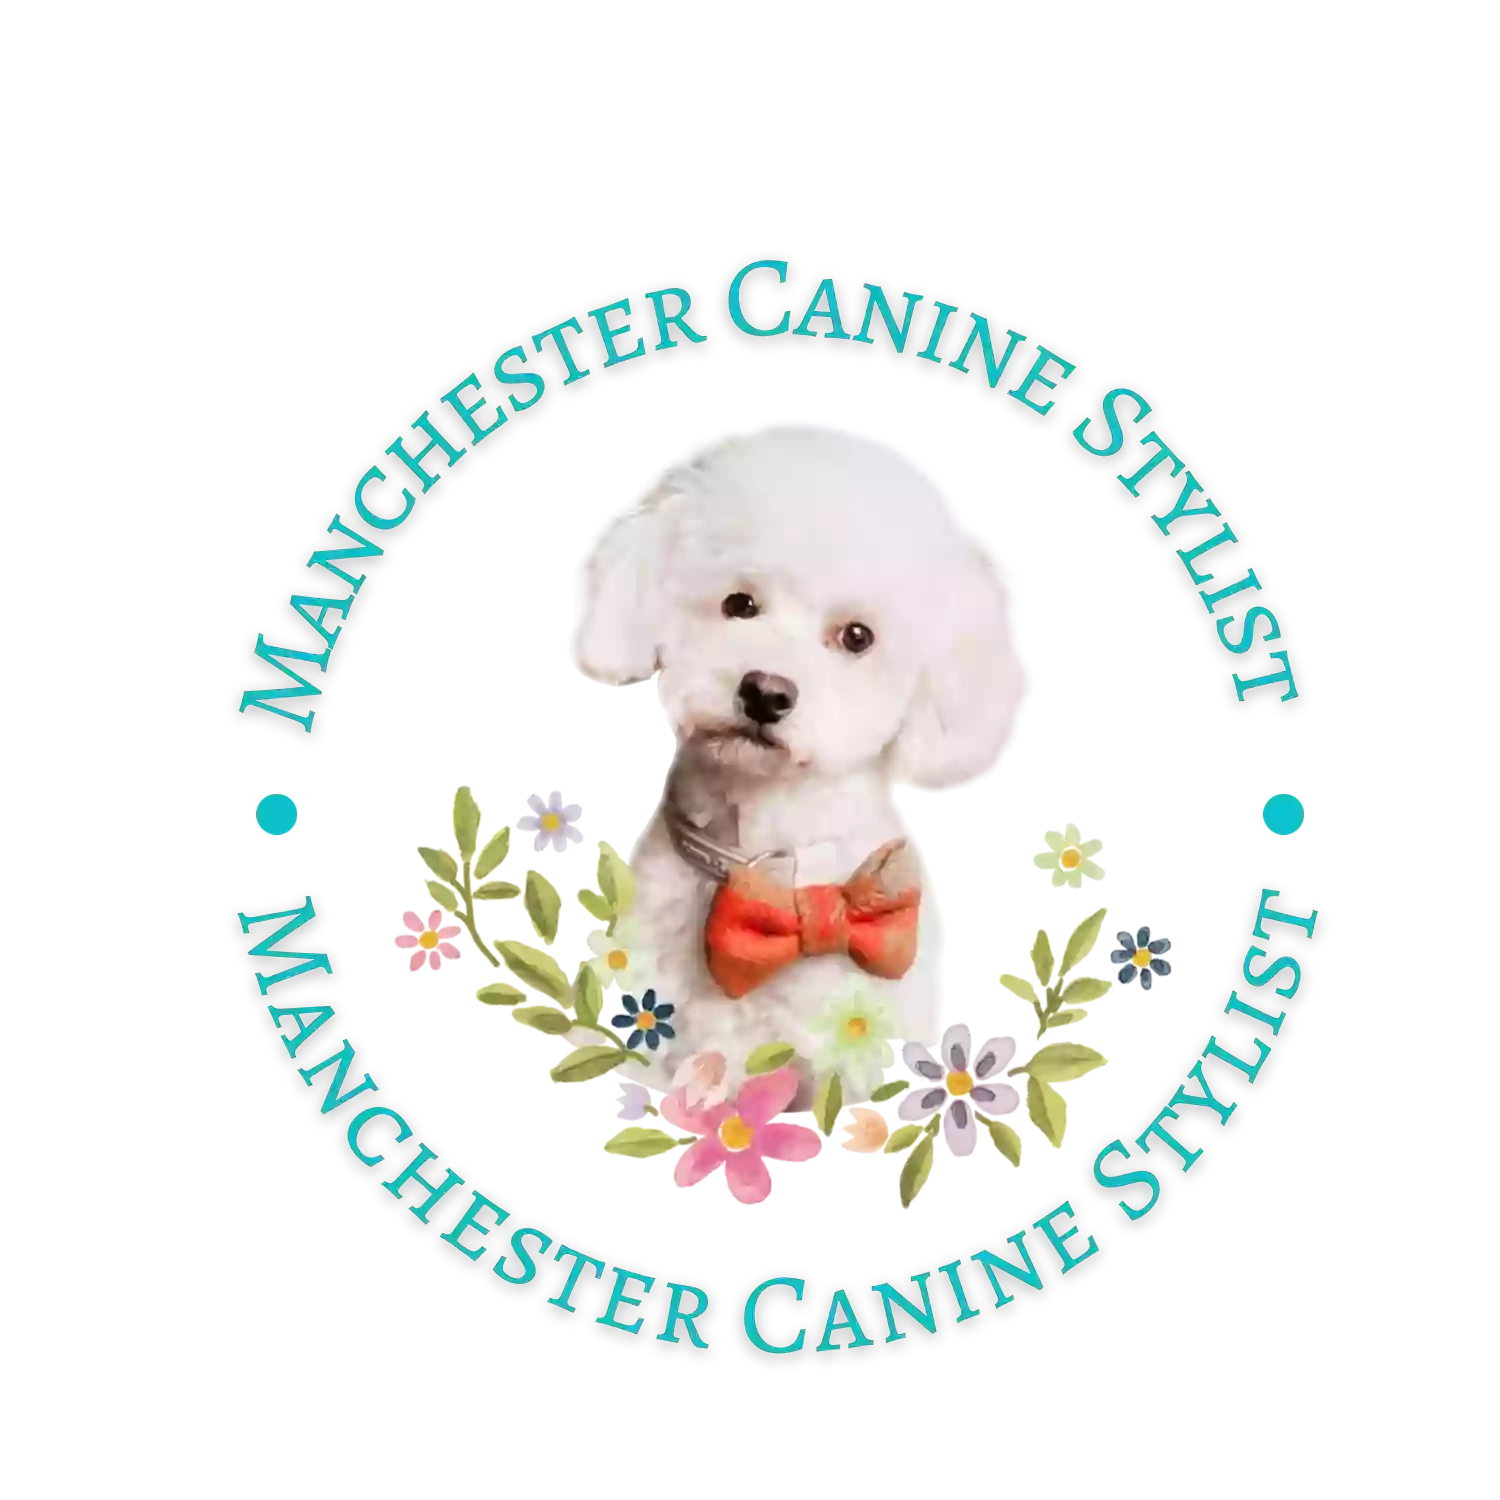 Manchester Canine Stylist